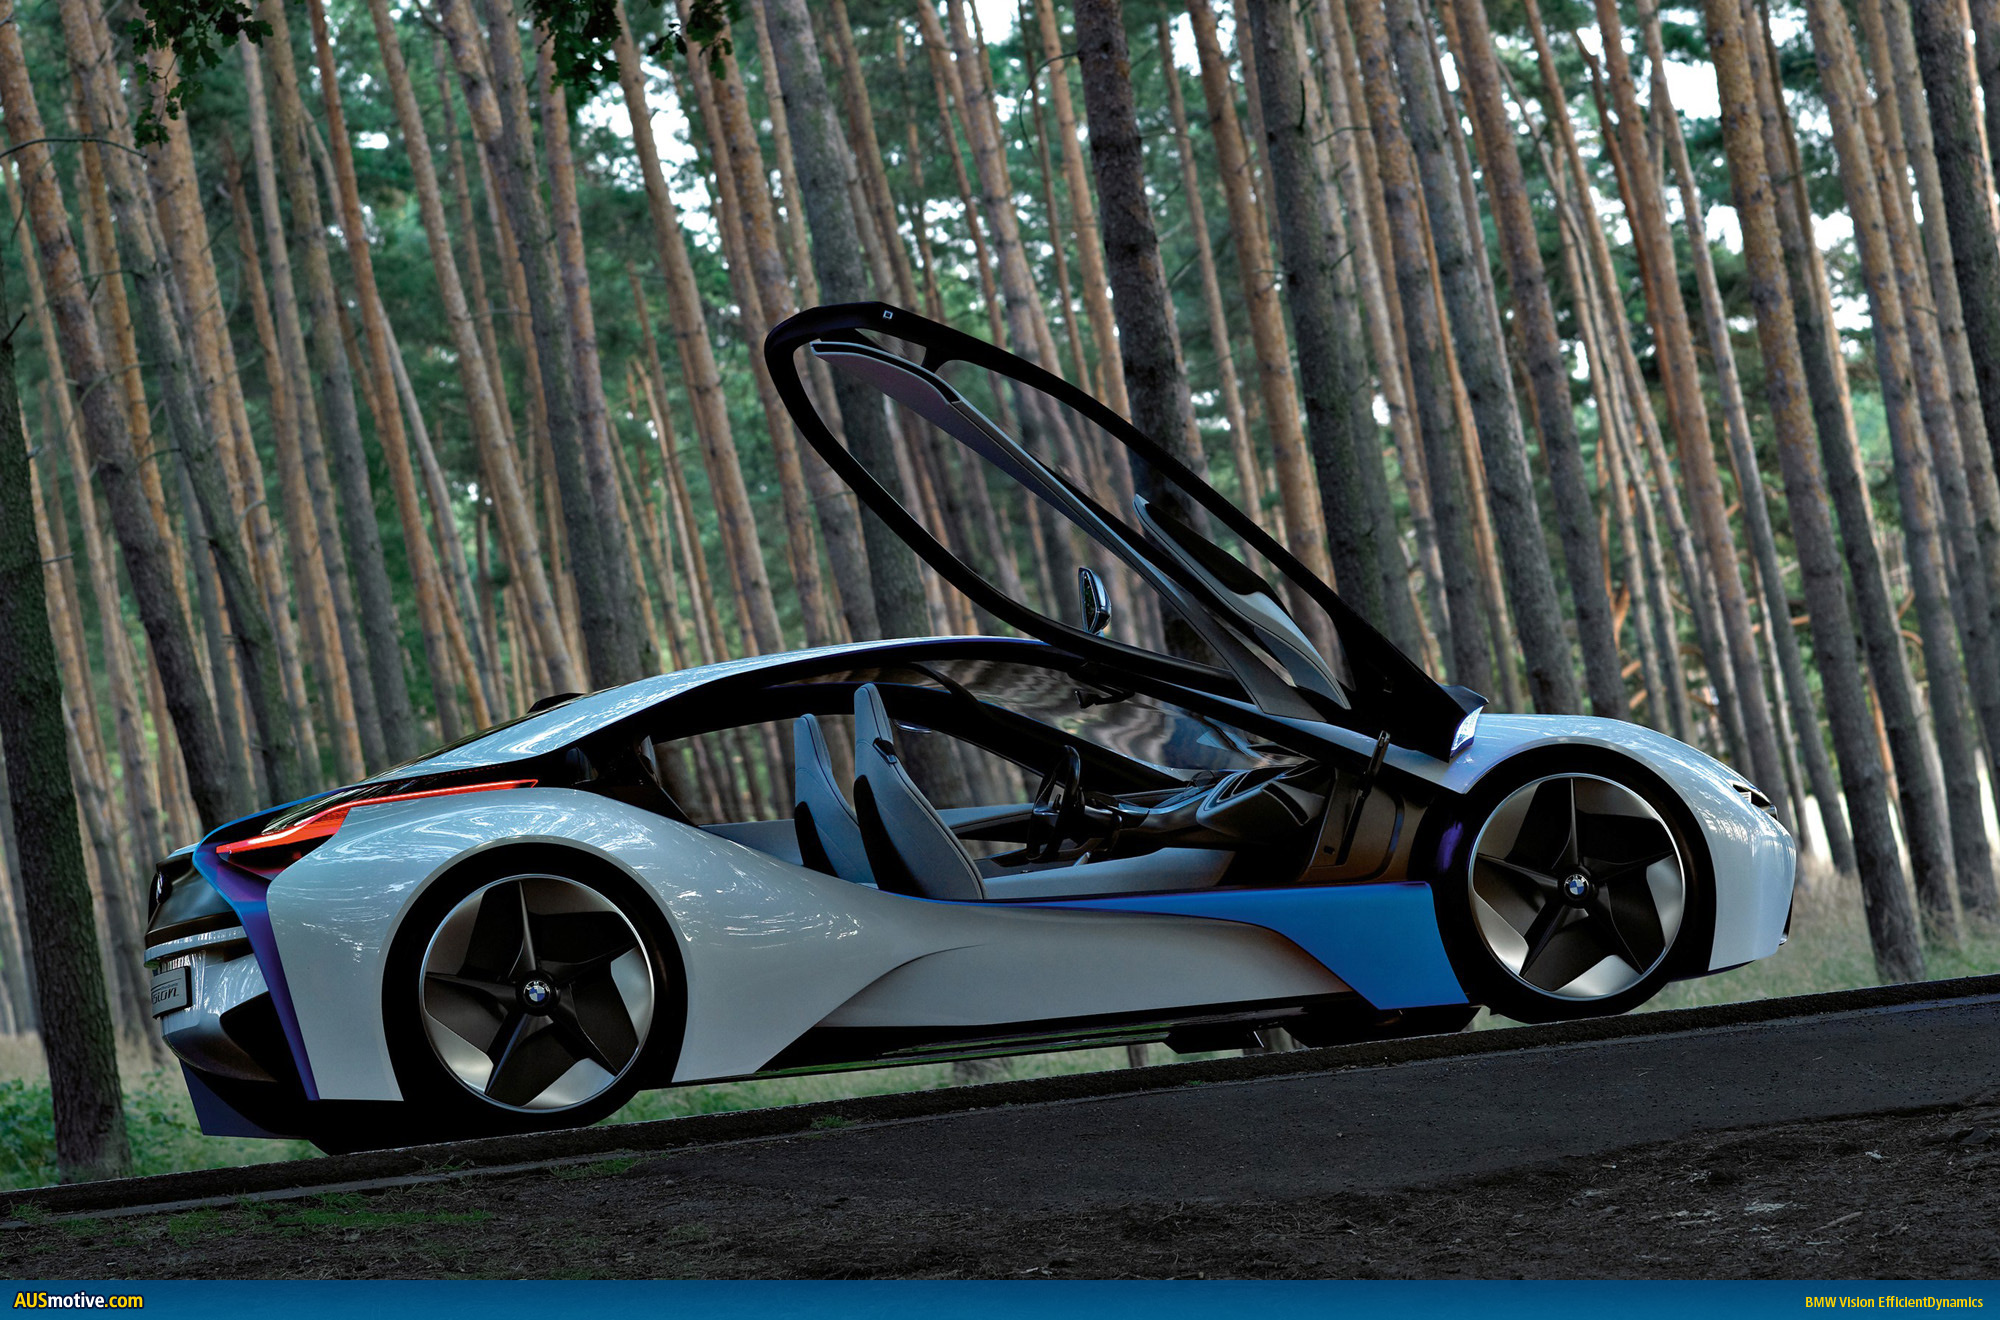 How much is the bmw vision efficientdynamics